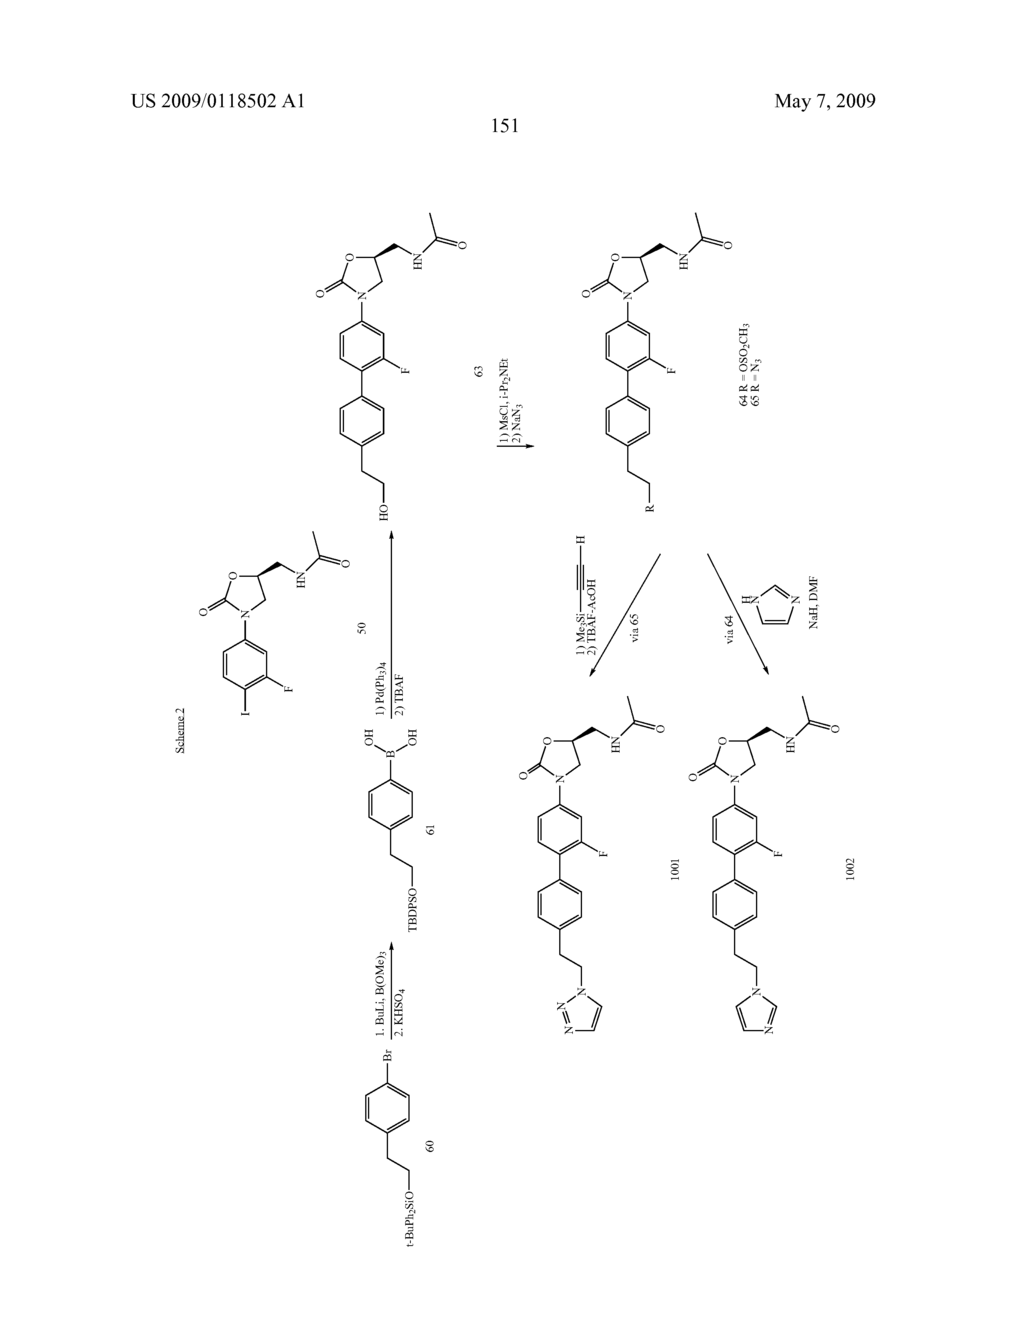 BIARYL HETEROCYCLIC COMPOUNDS AND METHODS OF MAKING AND USING THE SAME - diagram, schematic, and image 152